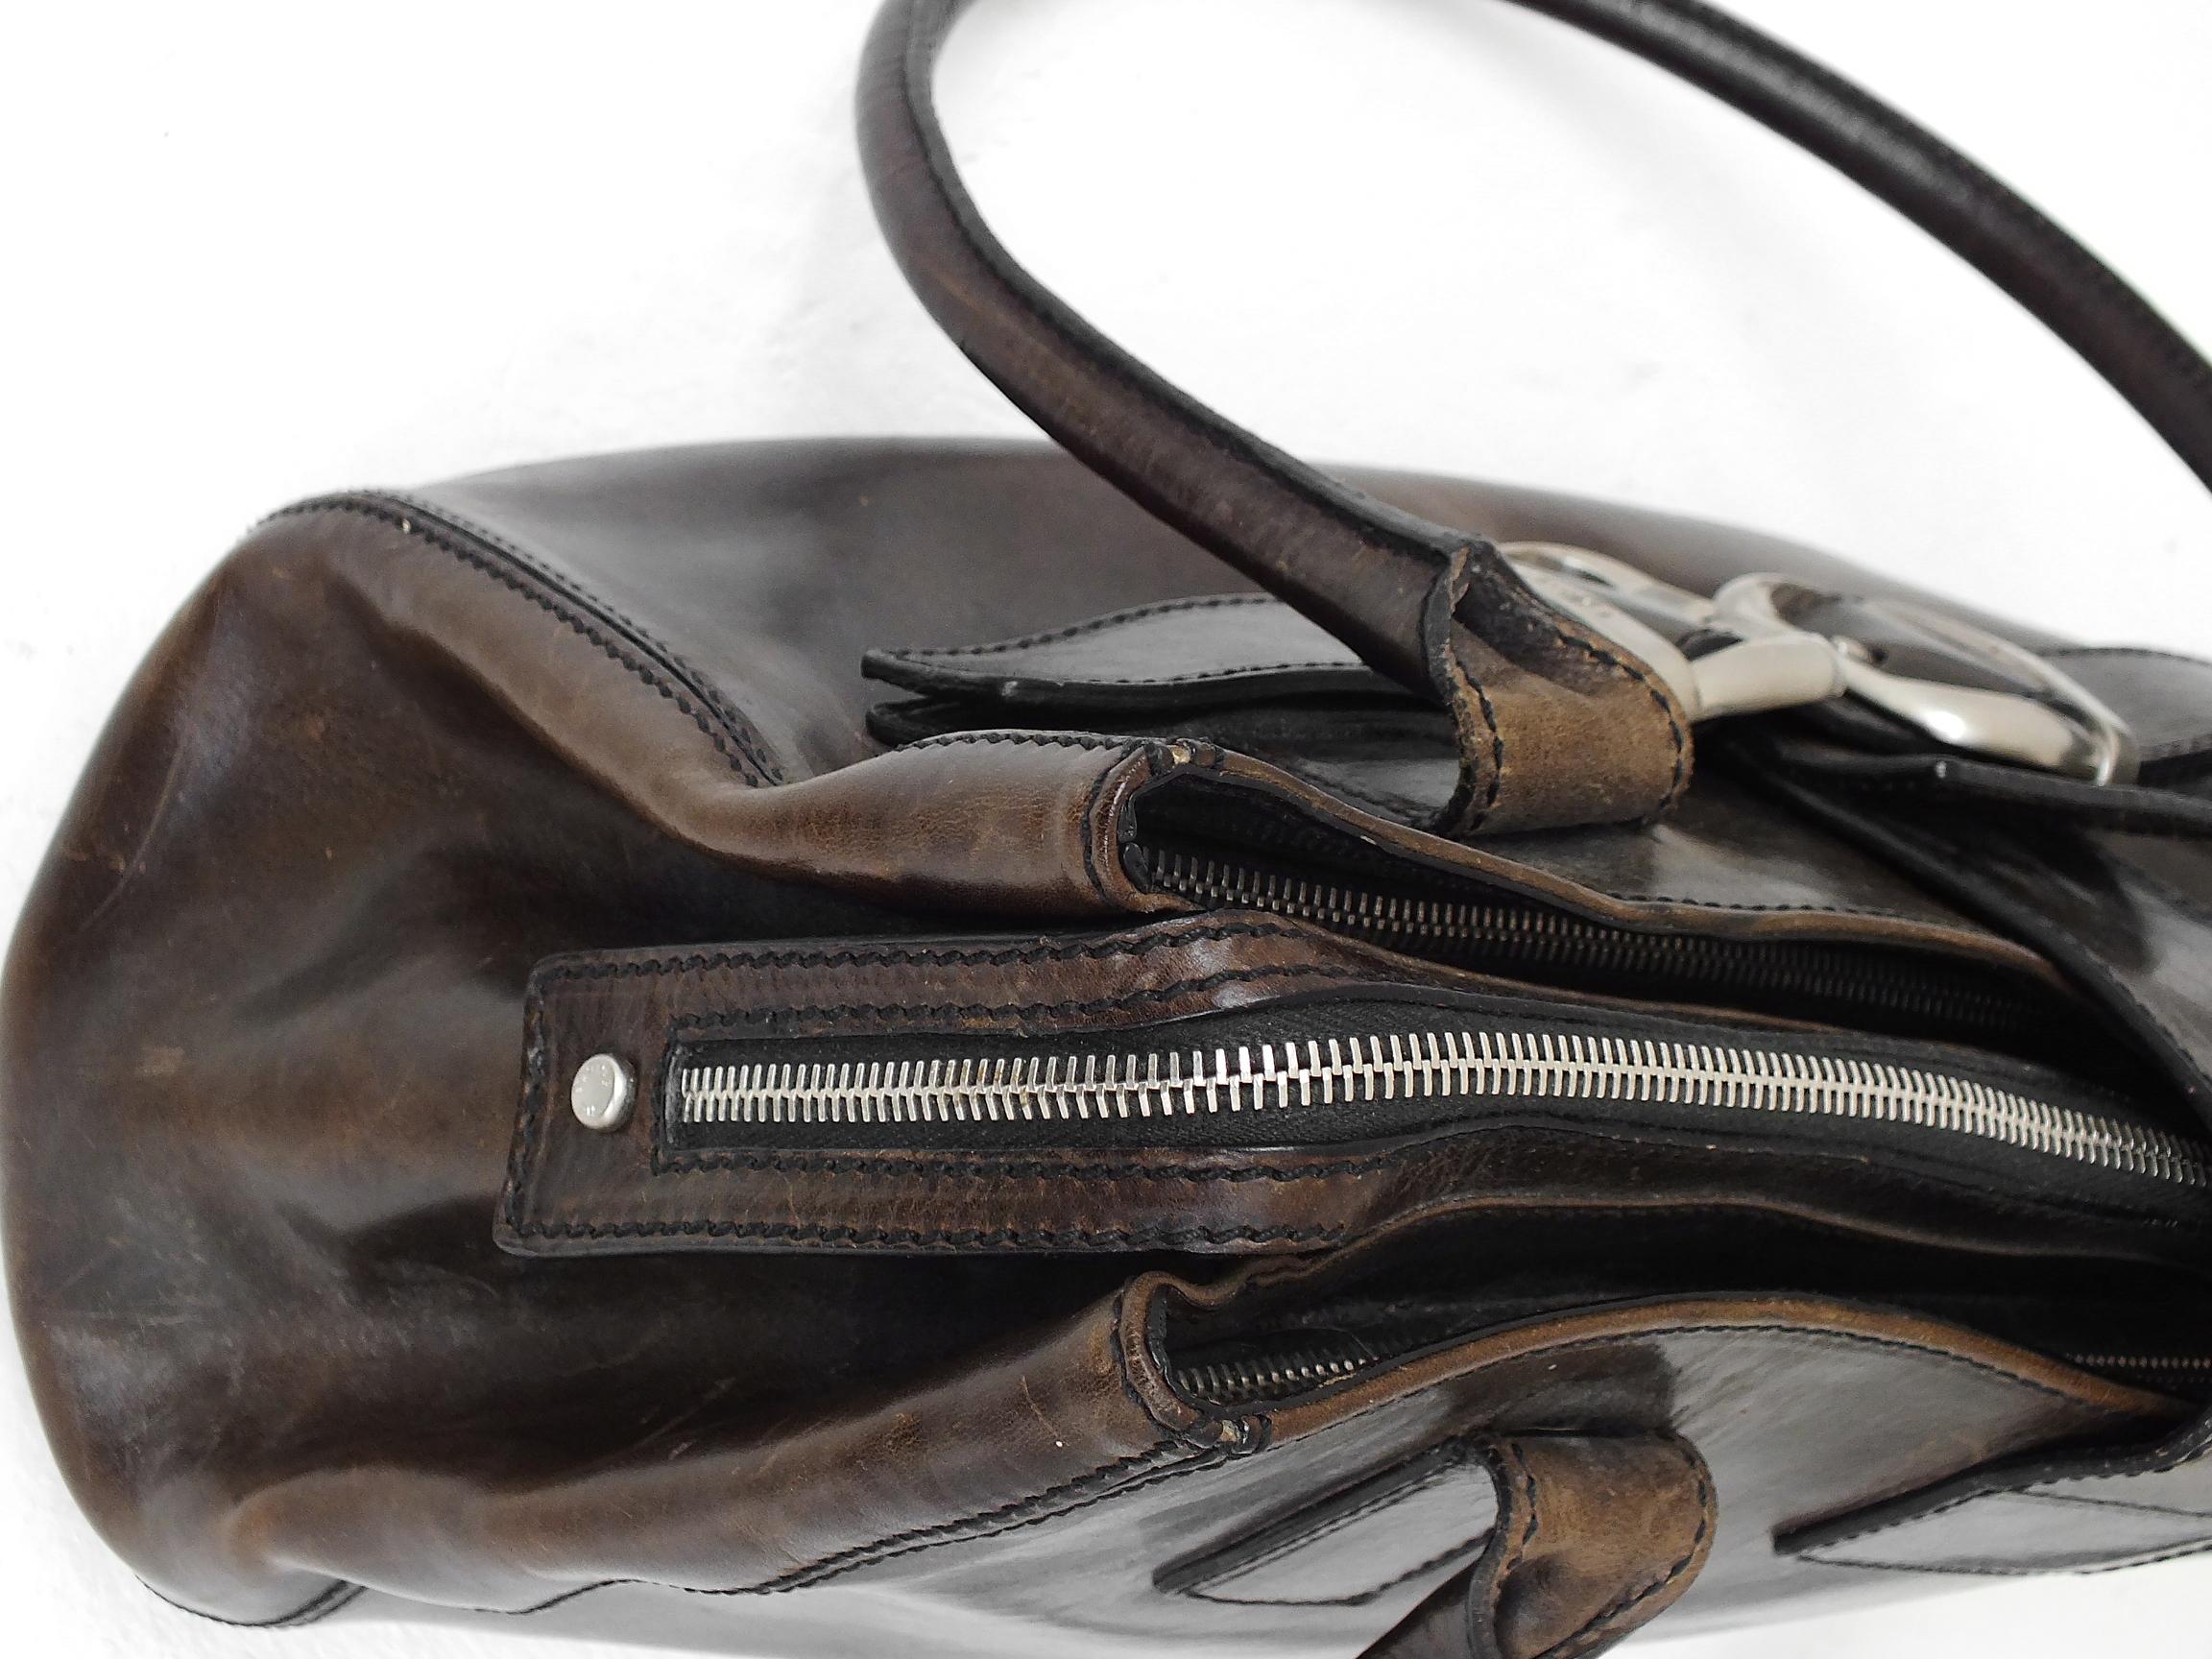 1990s the Bridge Design Leather Great Bag Years '1990 Perfect Condition For Sale 3